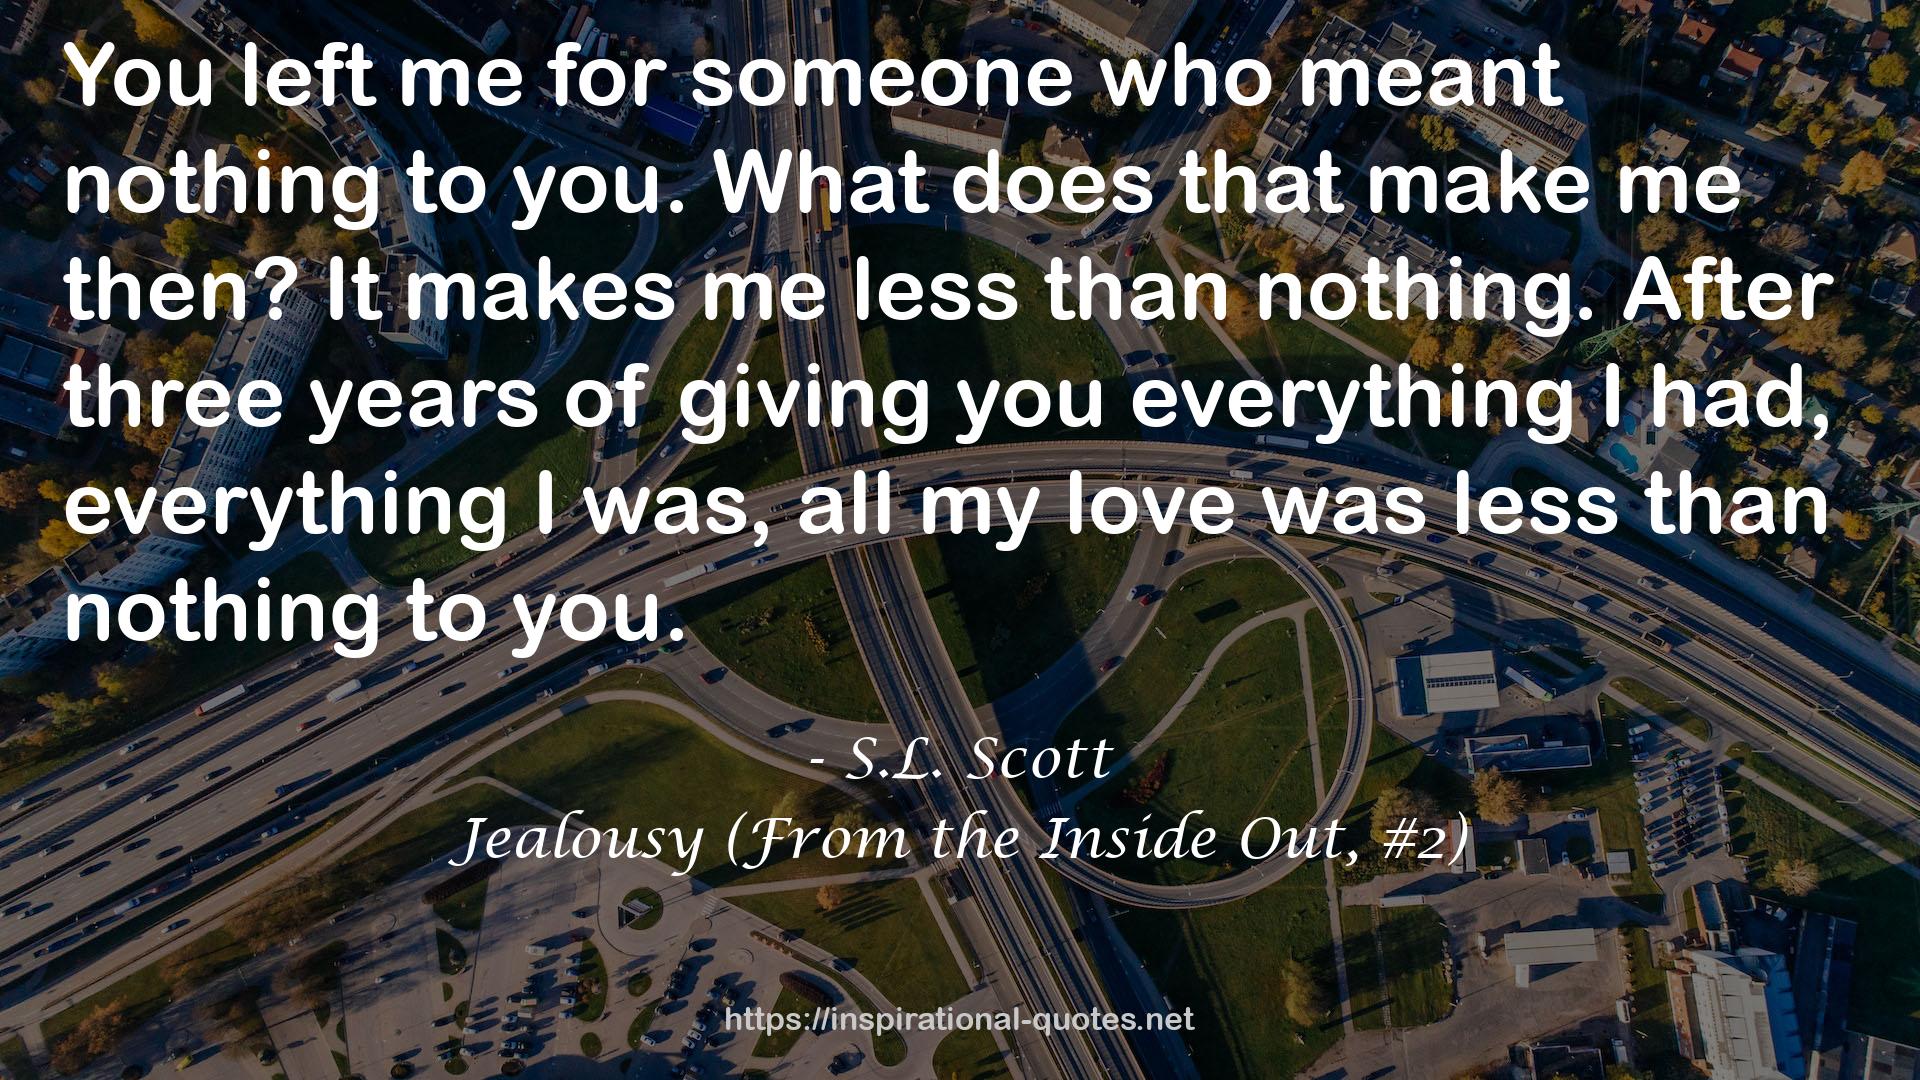 Jealousy (From the Inside Out, #2) QUOTES